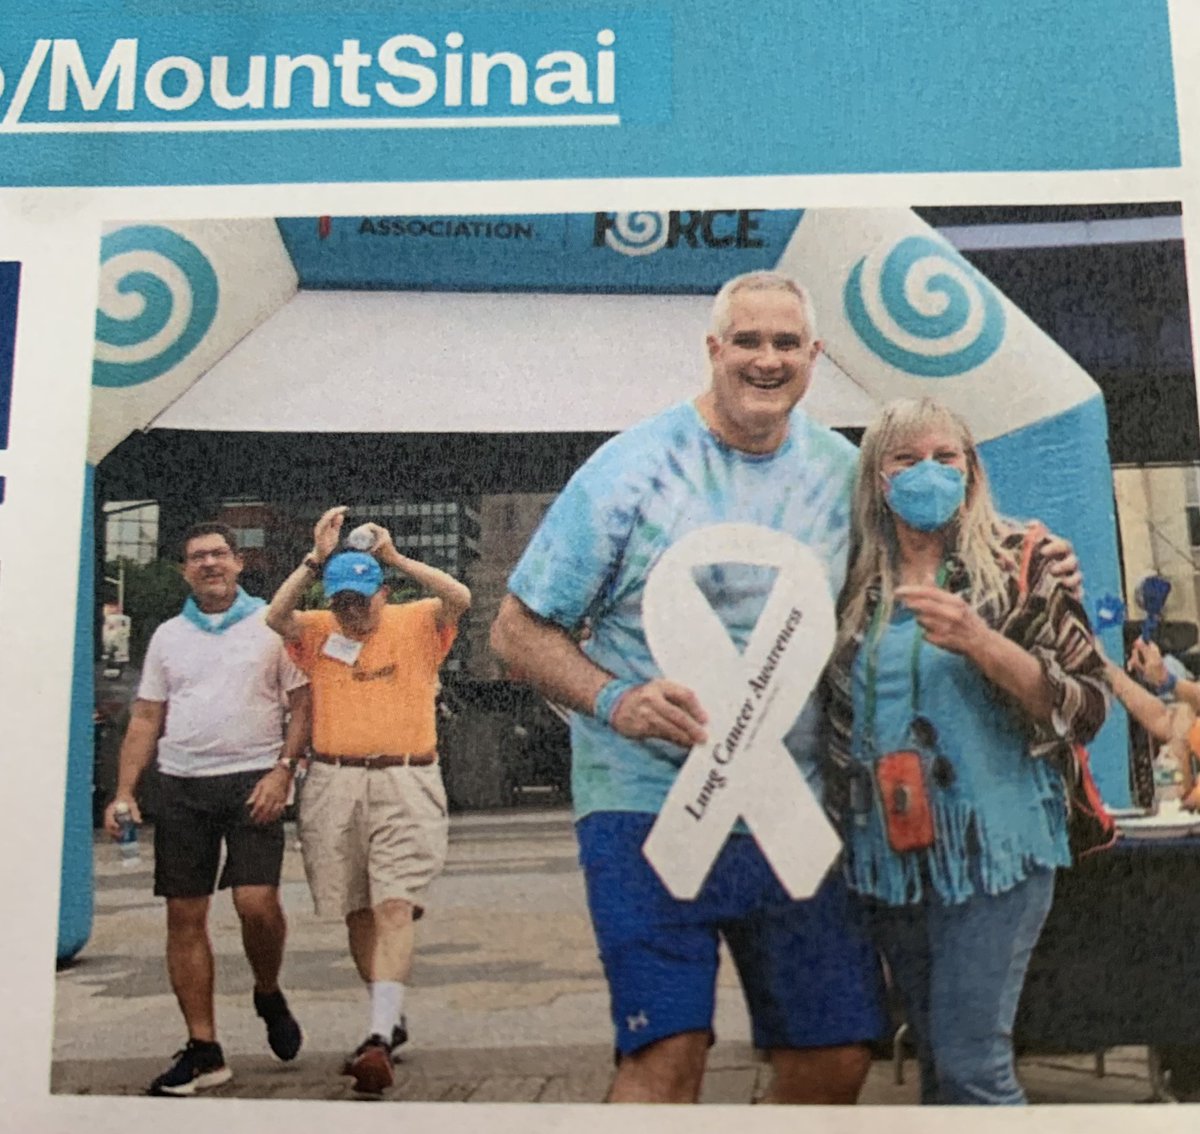 2024 Walk.  See you there!
@NickRohsMD 
@LUNGFORCE 
@IcahnMountSinai 
@TheWRP4LC 
#ResearchSavesLives